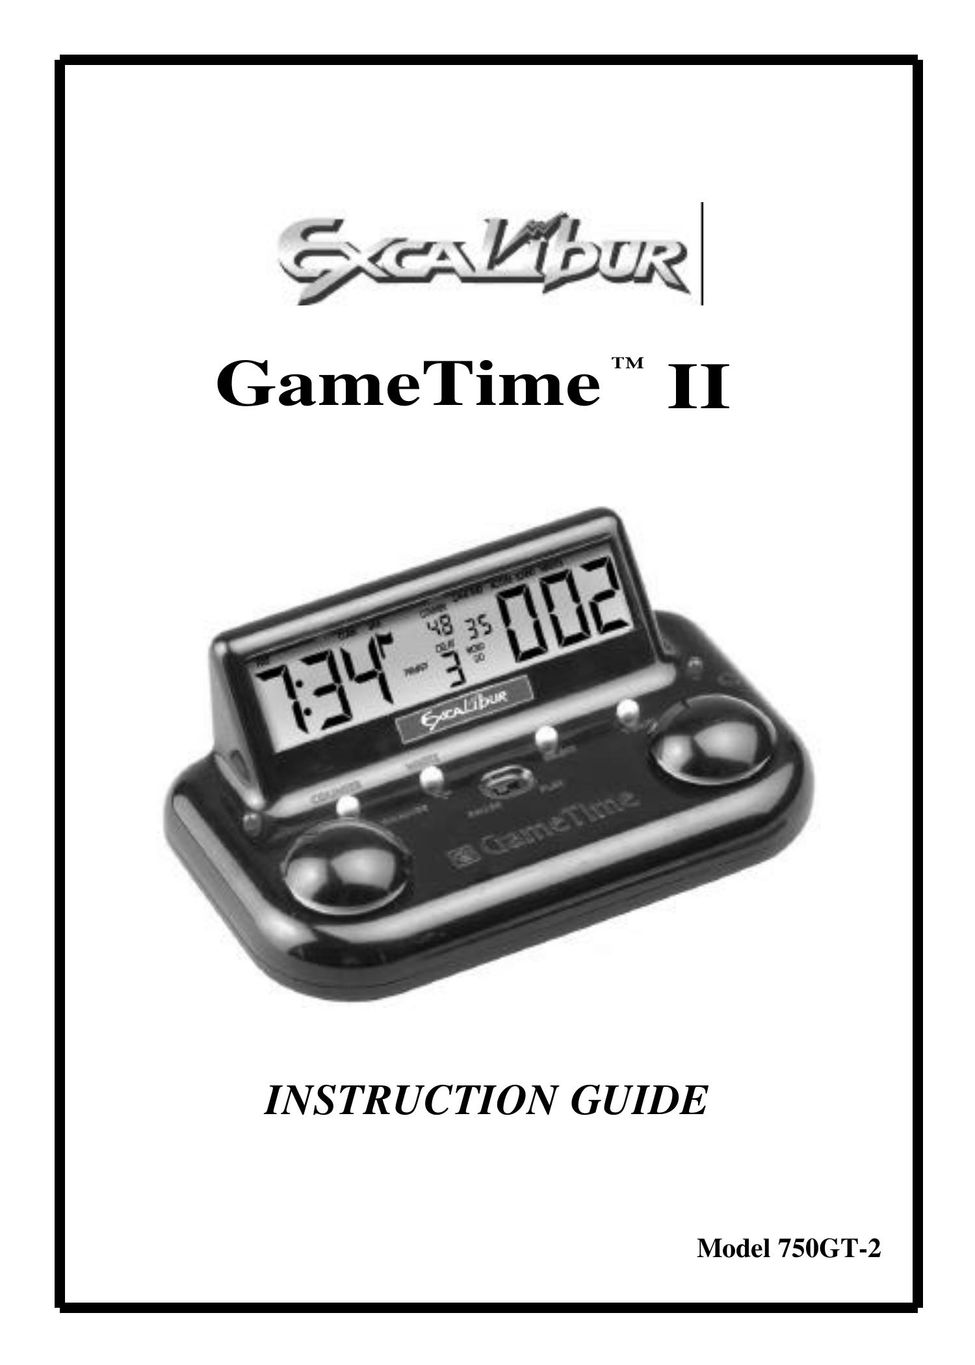 CarAlarms.com 750GT-2 MP3 Player User Manual (Page 1)